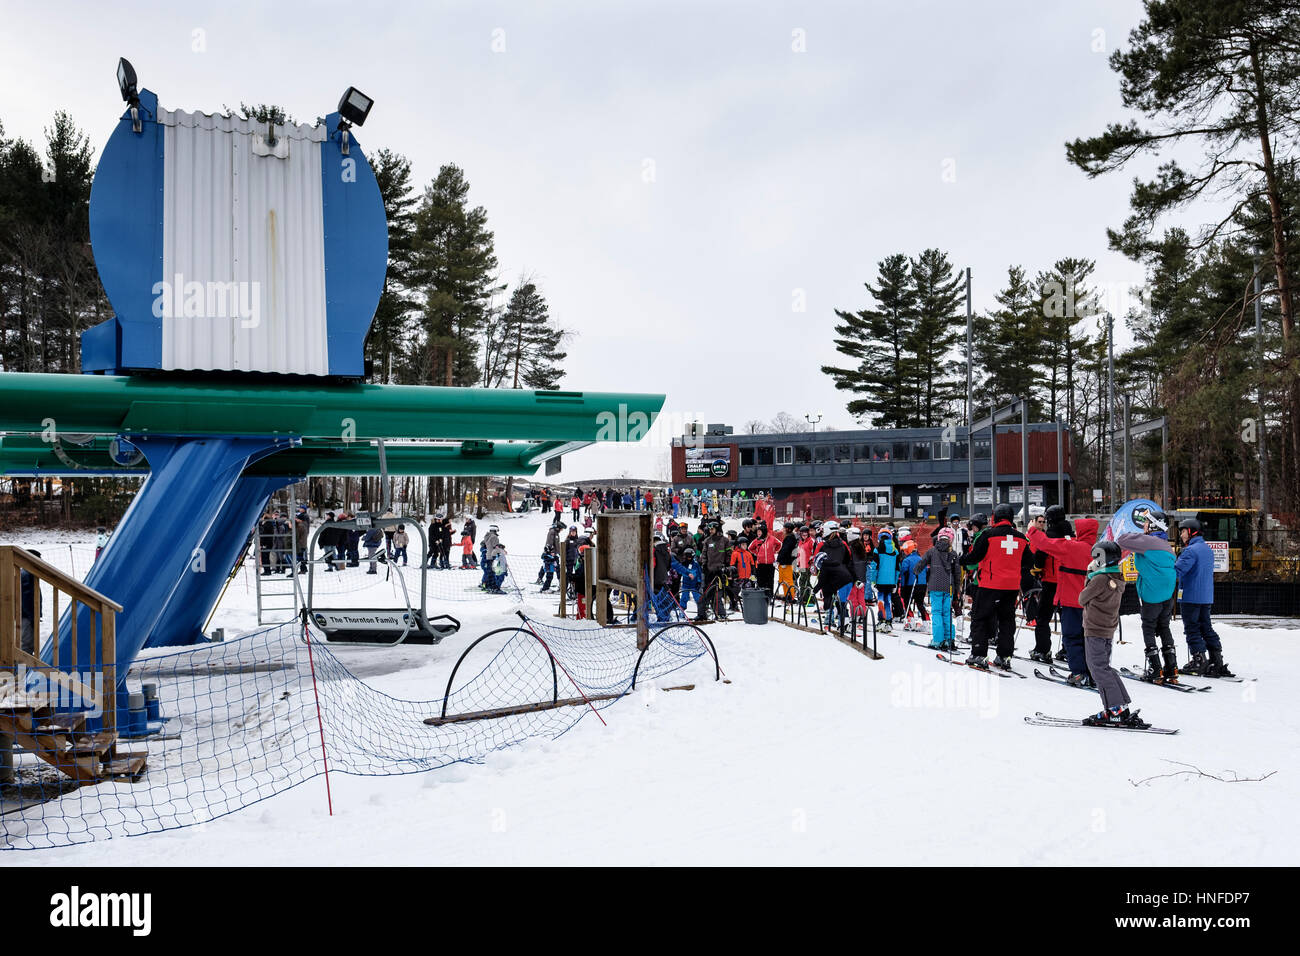 Lineup of skiers waiting for a ski lift at Boler Mountain Ski Club in London, Ontario, Canada. Stock Photo